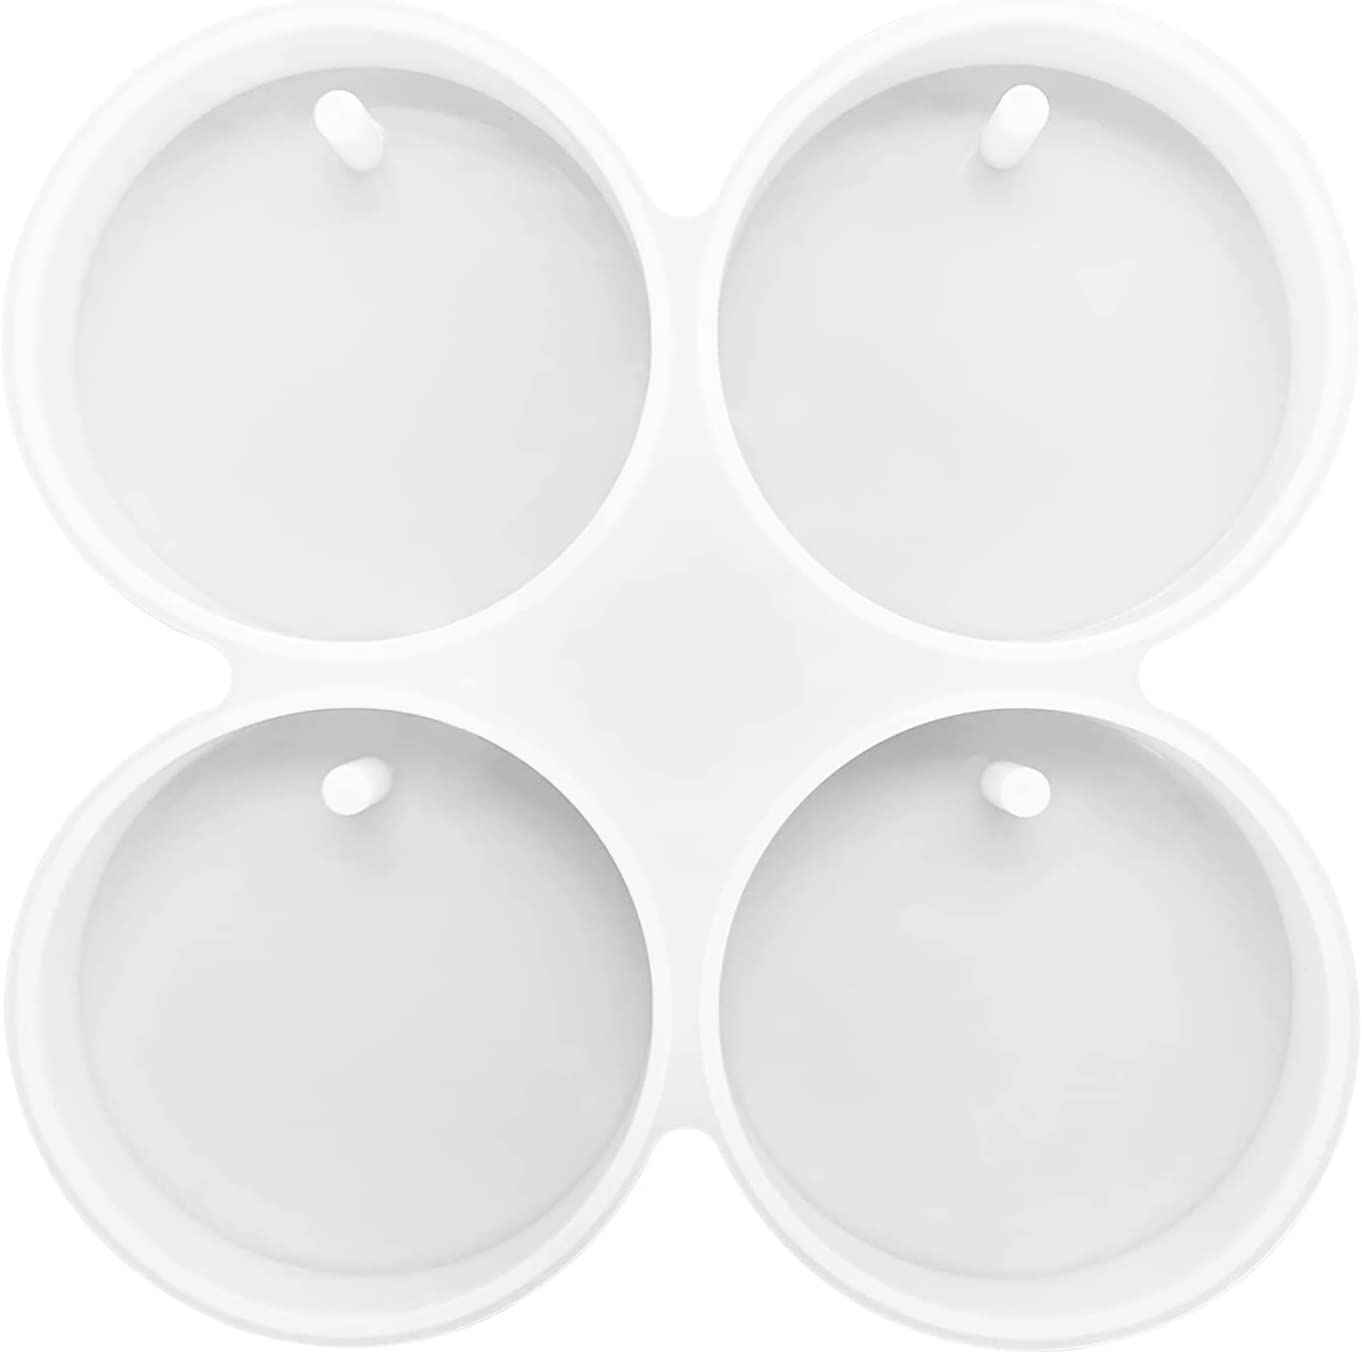 Freshie Cardstock Cutouts Rounds 2.5” inch for Freshies Random Mix | 32 pk  | For Scented Aroma Beads Bake with Mold for Car Freshie Designs, Cow